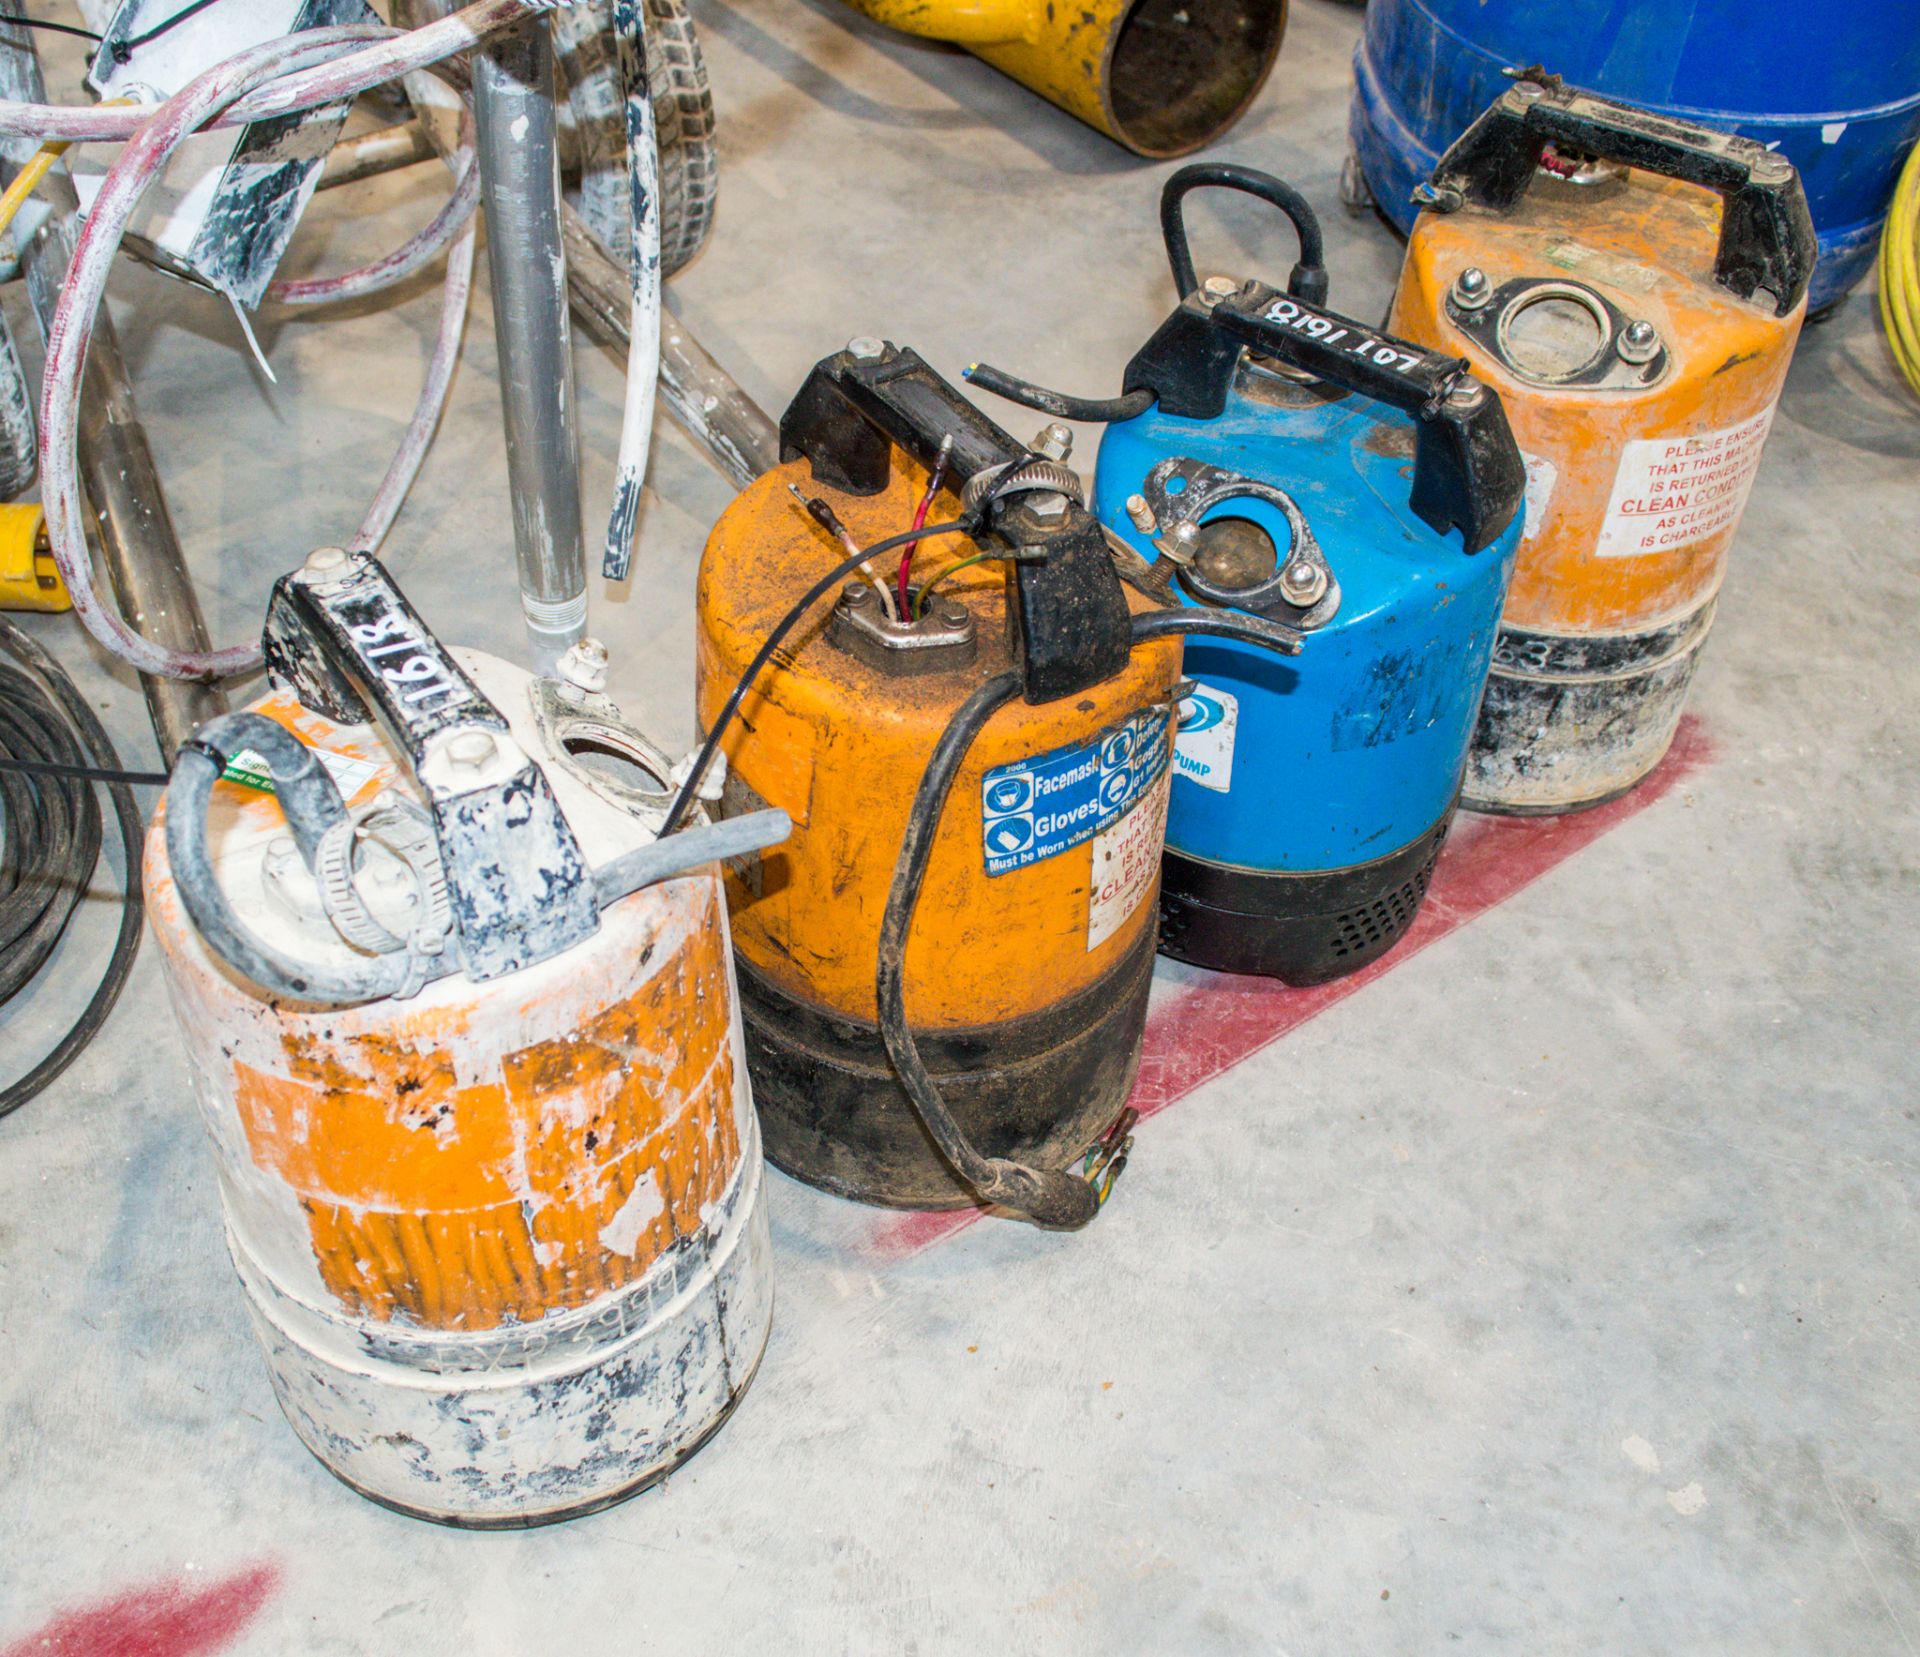 4 -submersible water pumps ** All with cords cut **